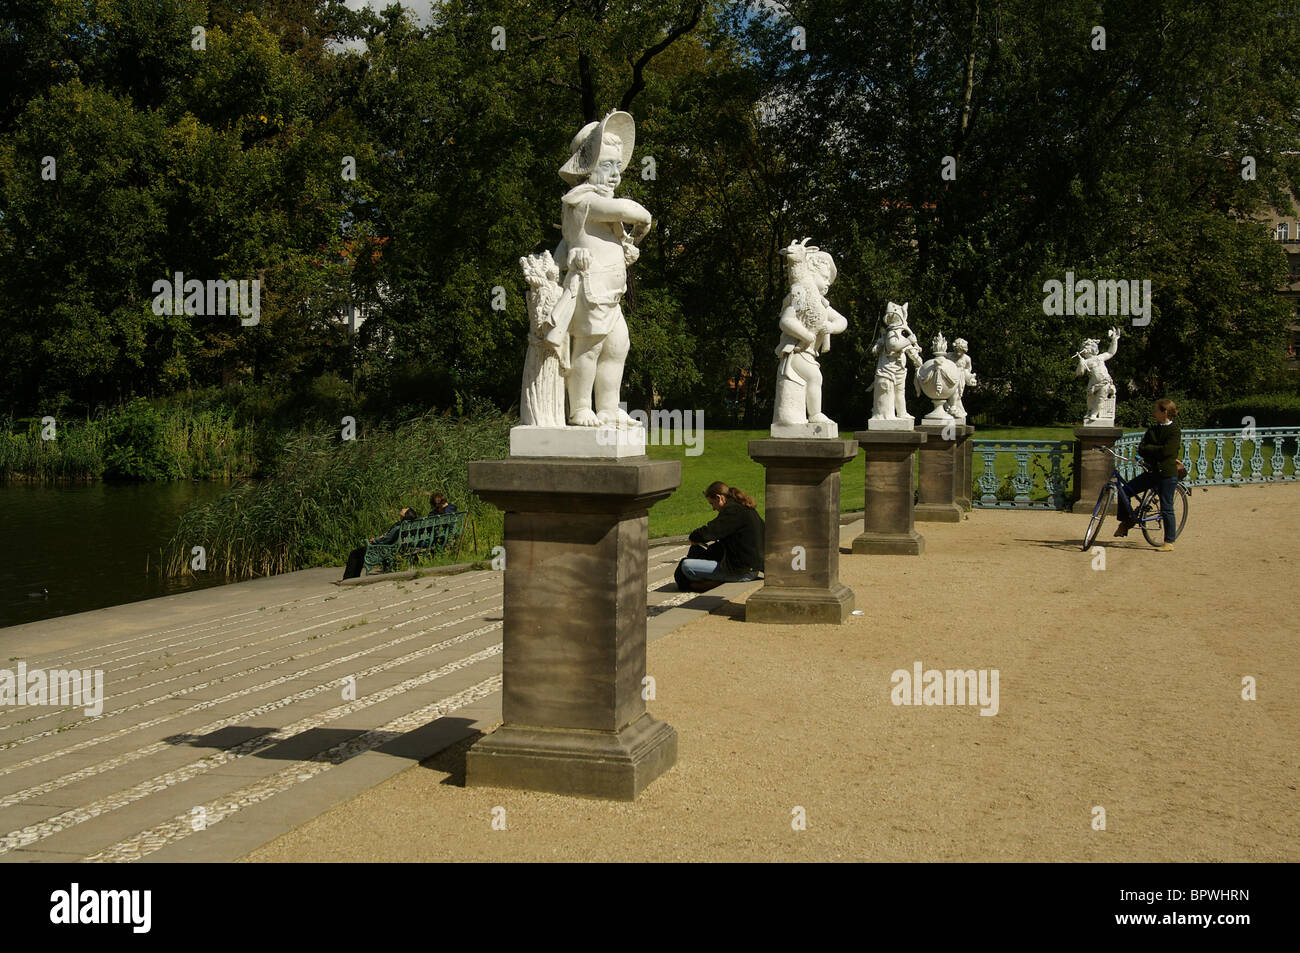 Statue In Gardens Charlottenburg Palace Stock Photos Statue In